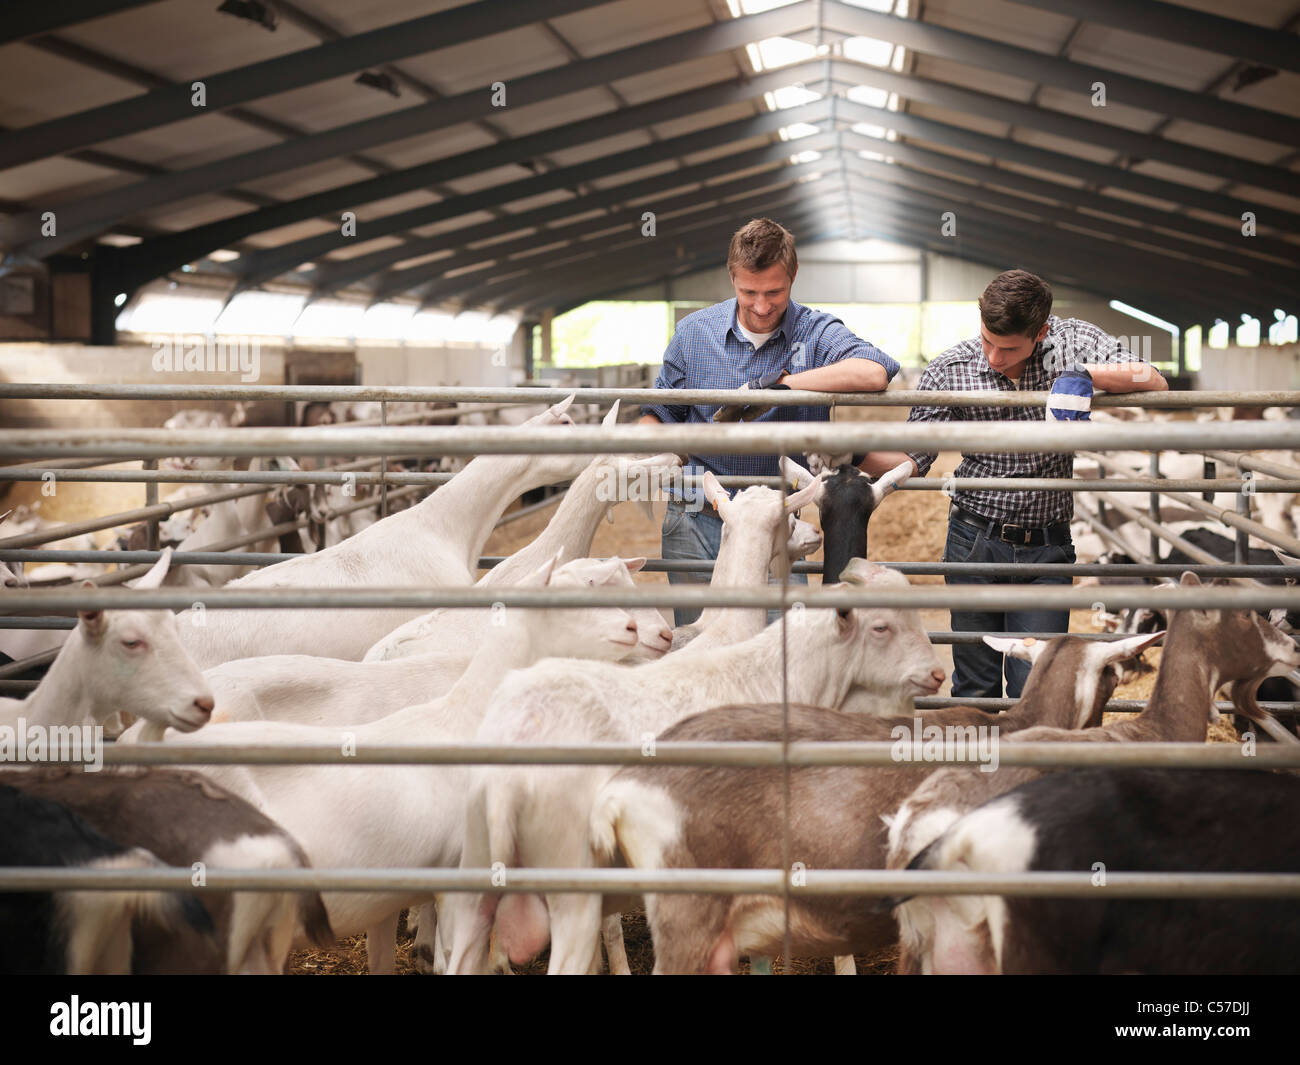 Workers tending to goats on farm Stock Photo